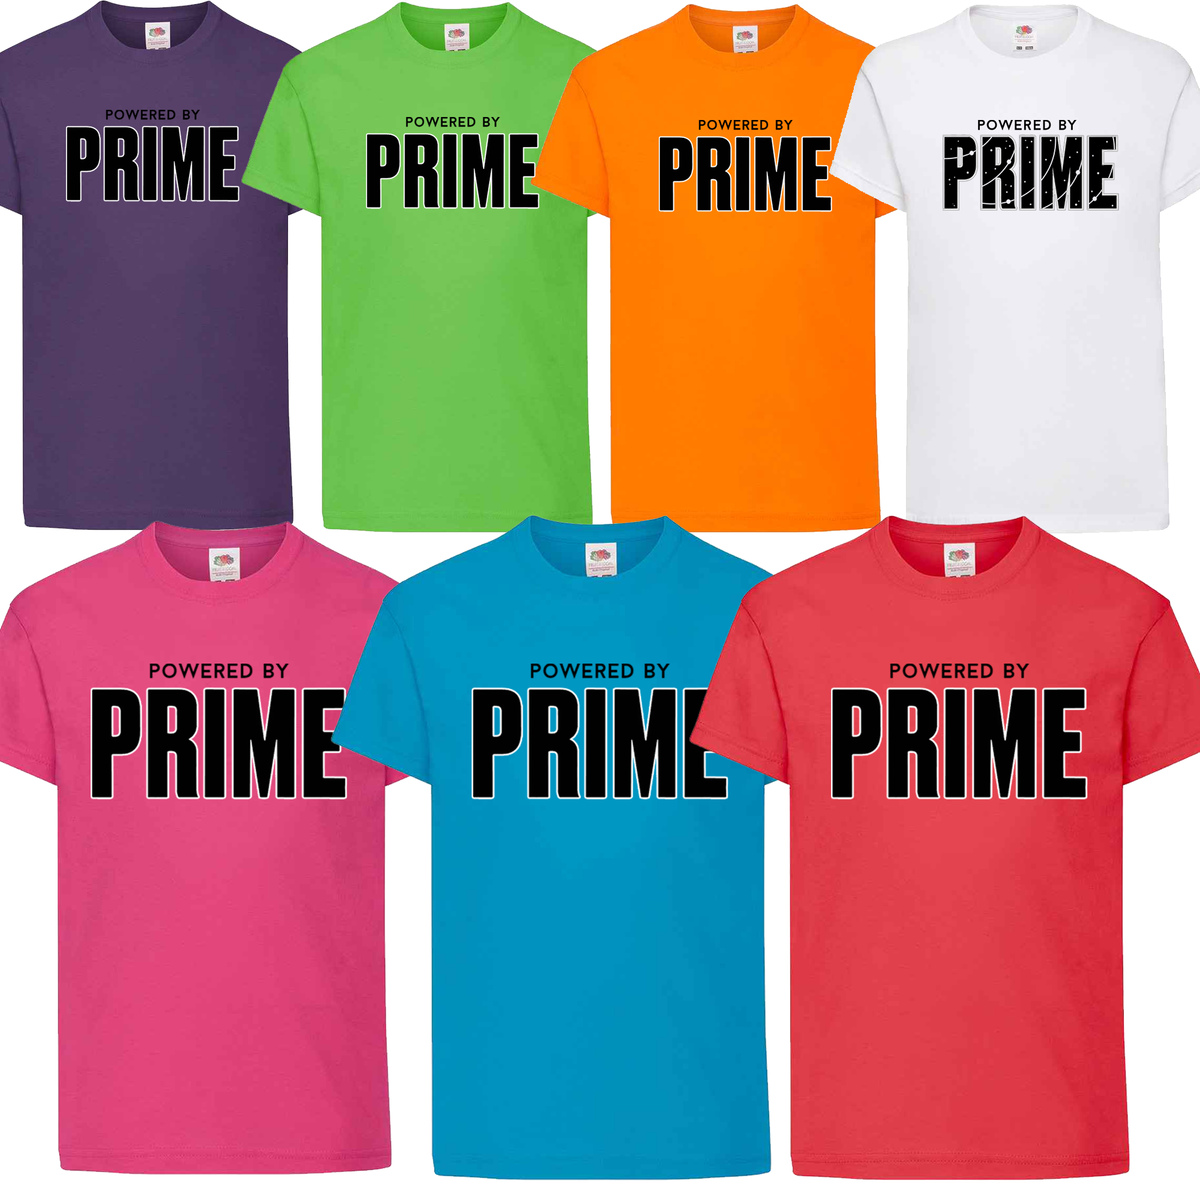 Powered By Prime - T-Shirt